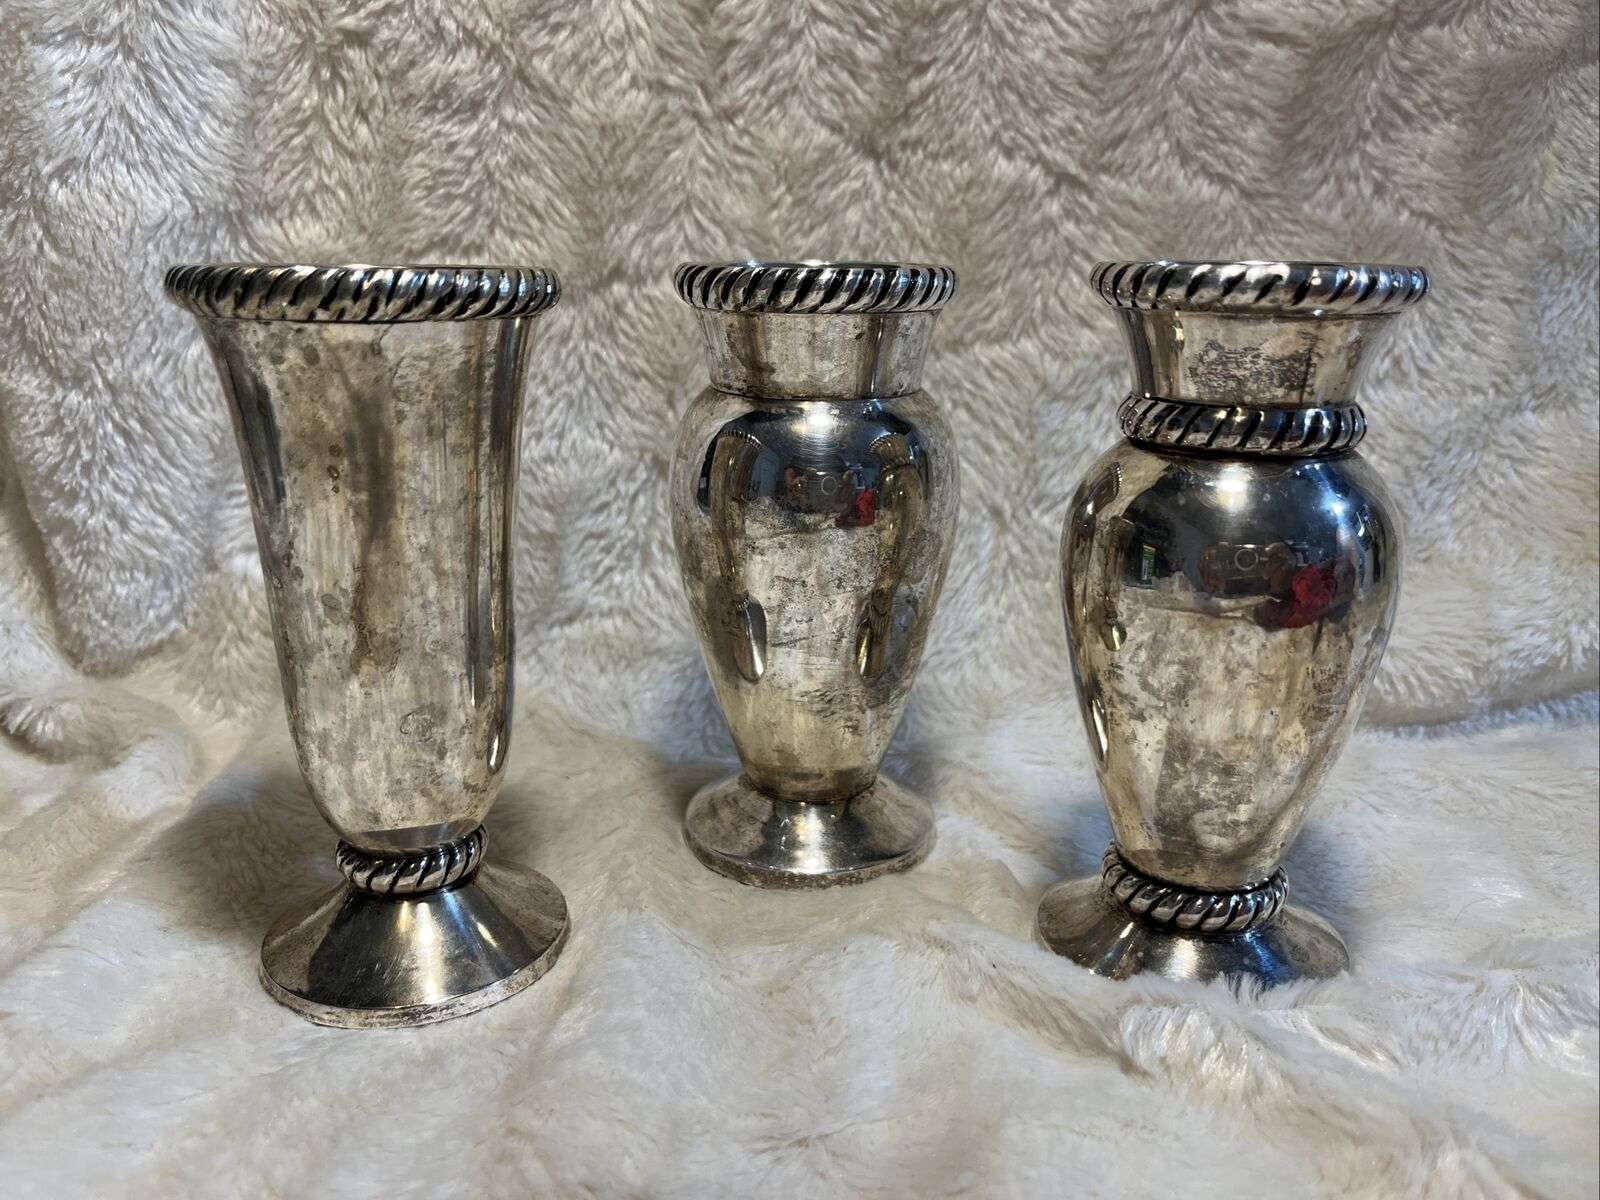 Pottery Barn Antiqued Silver Plated Twist Rope Weighted Bud Vases Set Of Three